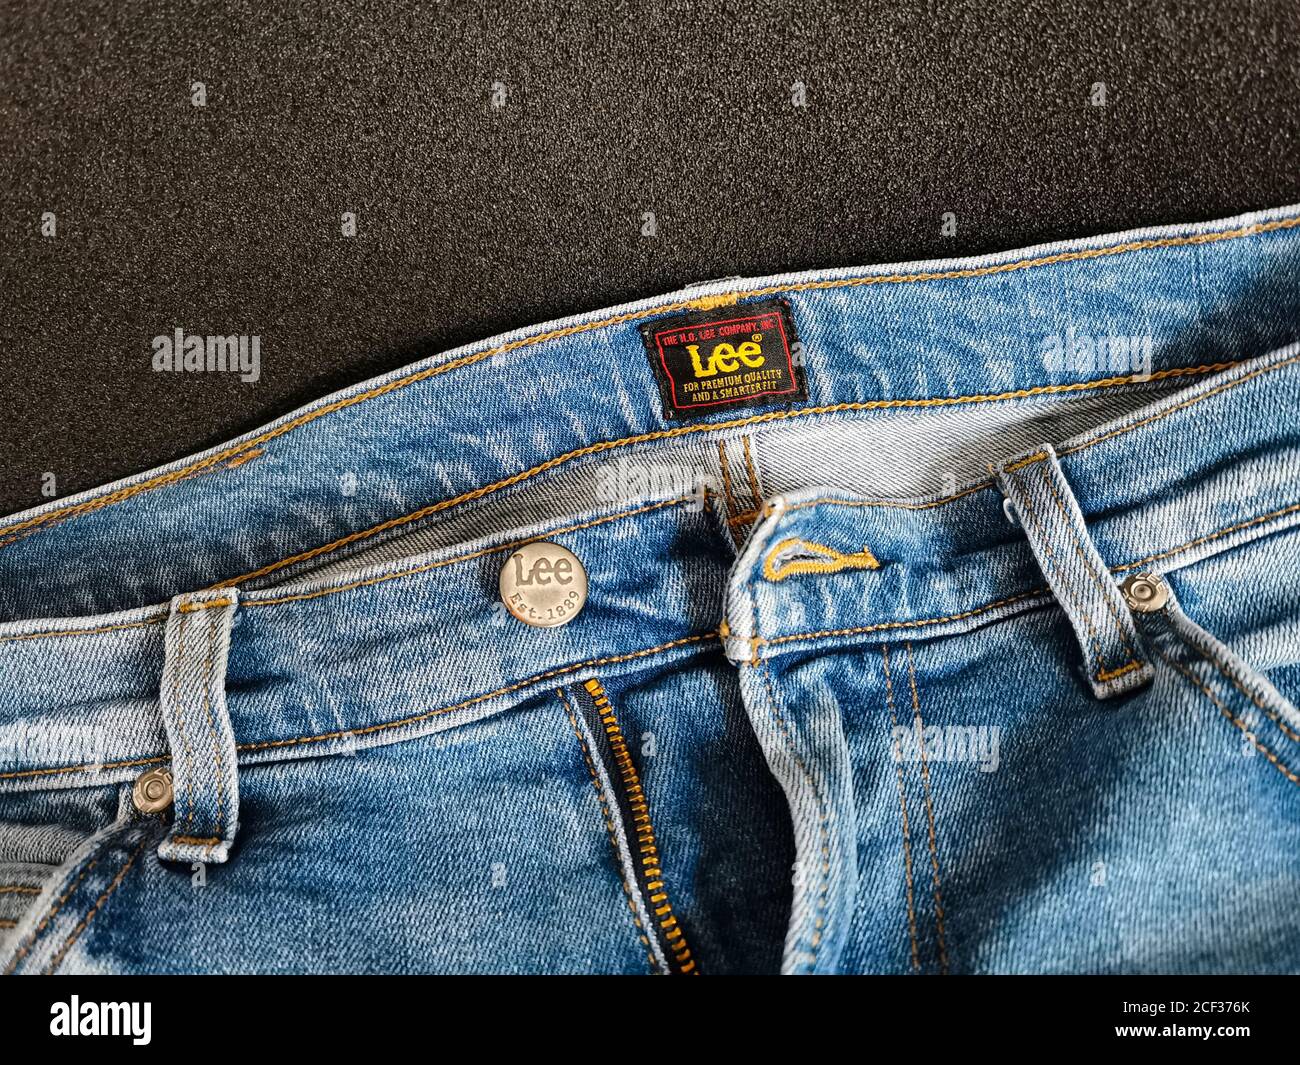 Lee american brand jeans. Close up of the Lee button on a blue men's jeans.  This is an American manufacturer, founded in 1889. Photo taken in Warsaw  Stock Photo - Alamy